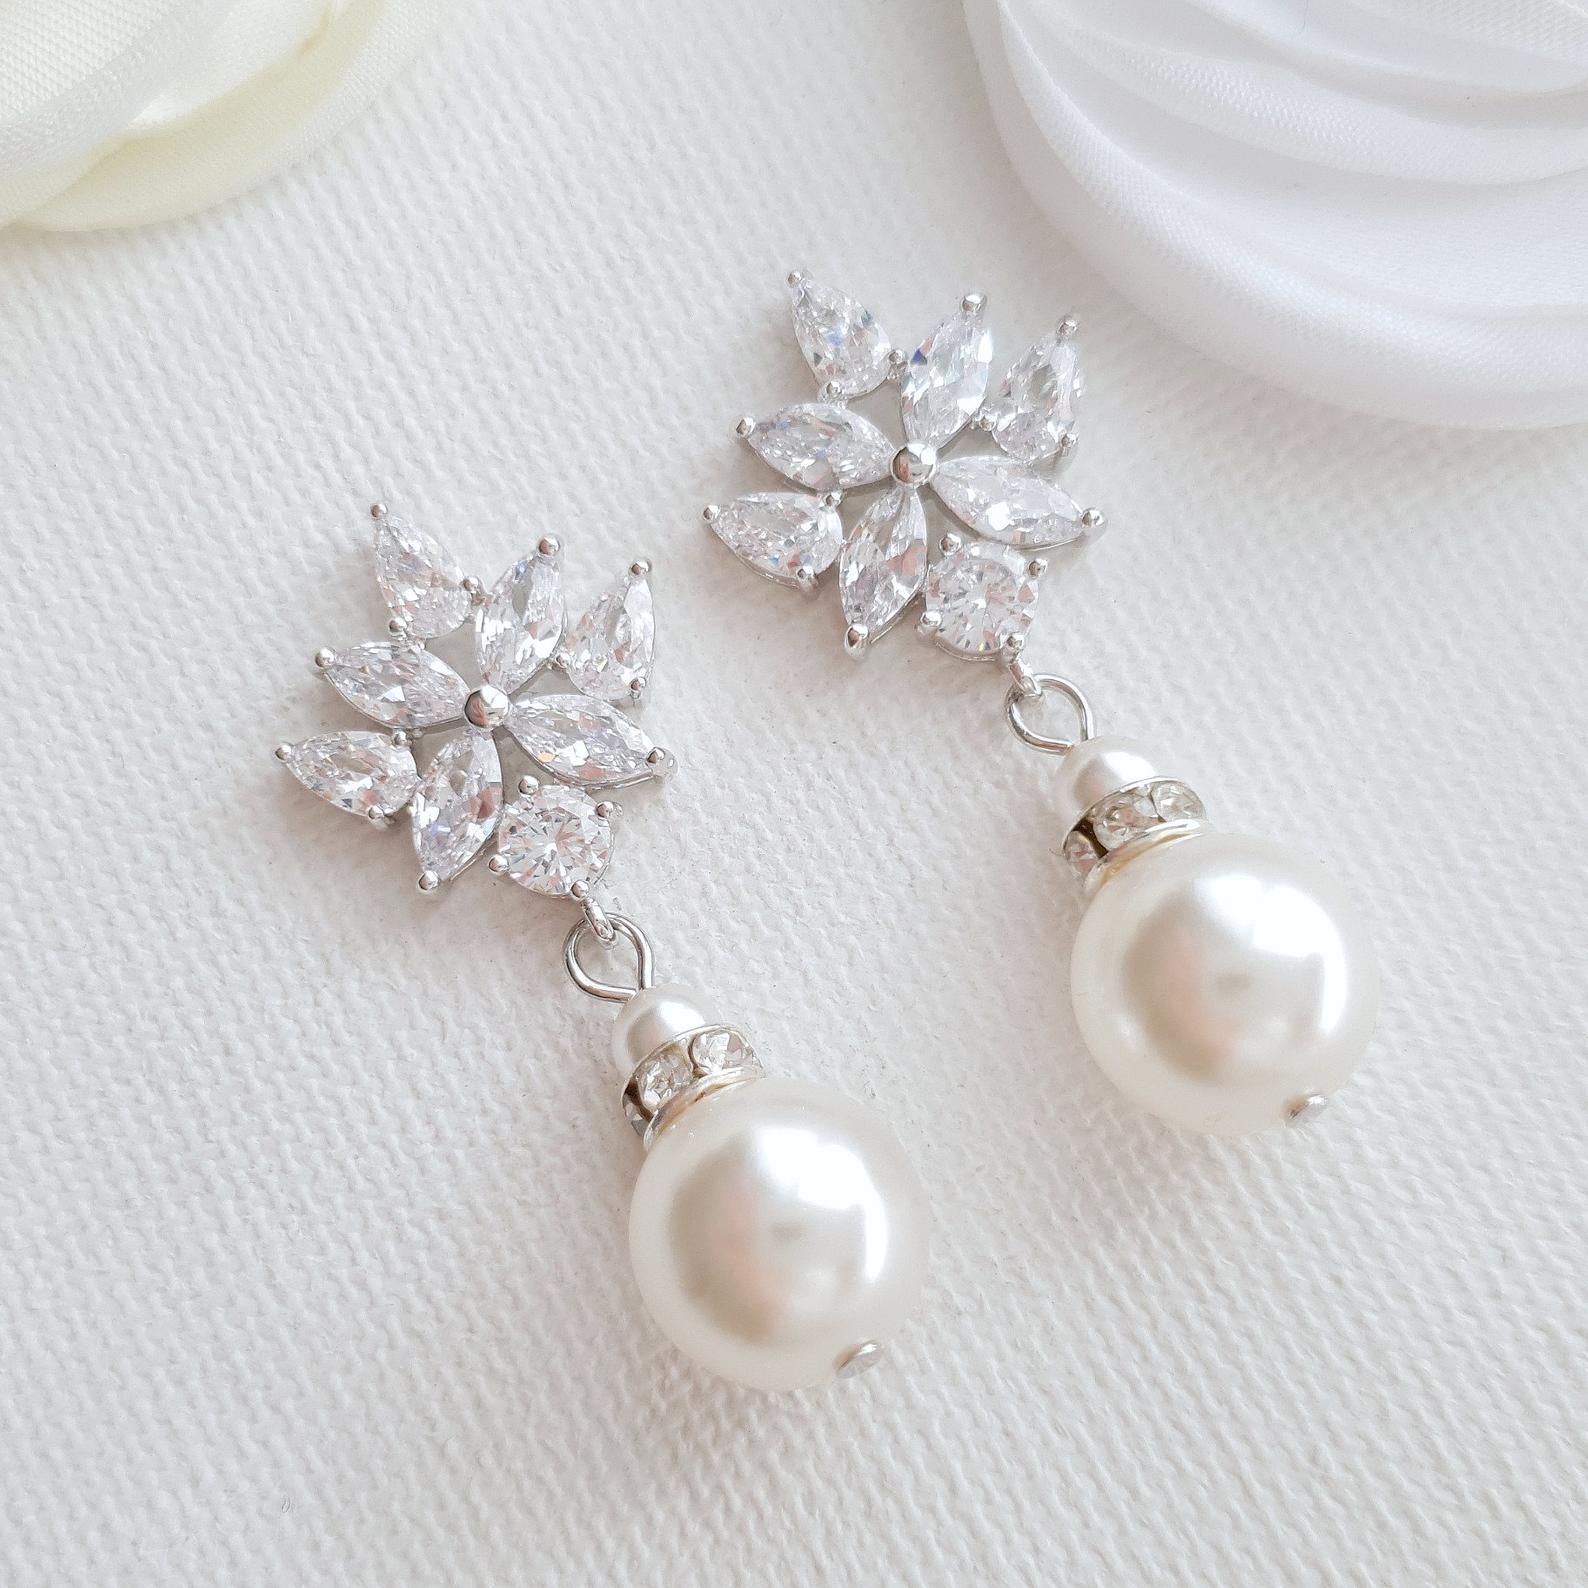 Bridal Drop Earrings Gold With Round Pearls- Rosa - PoetryDesigns